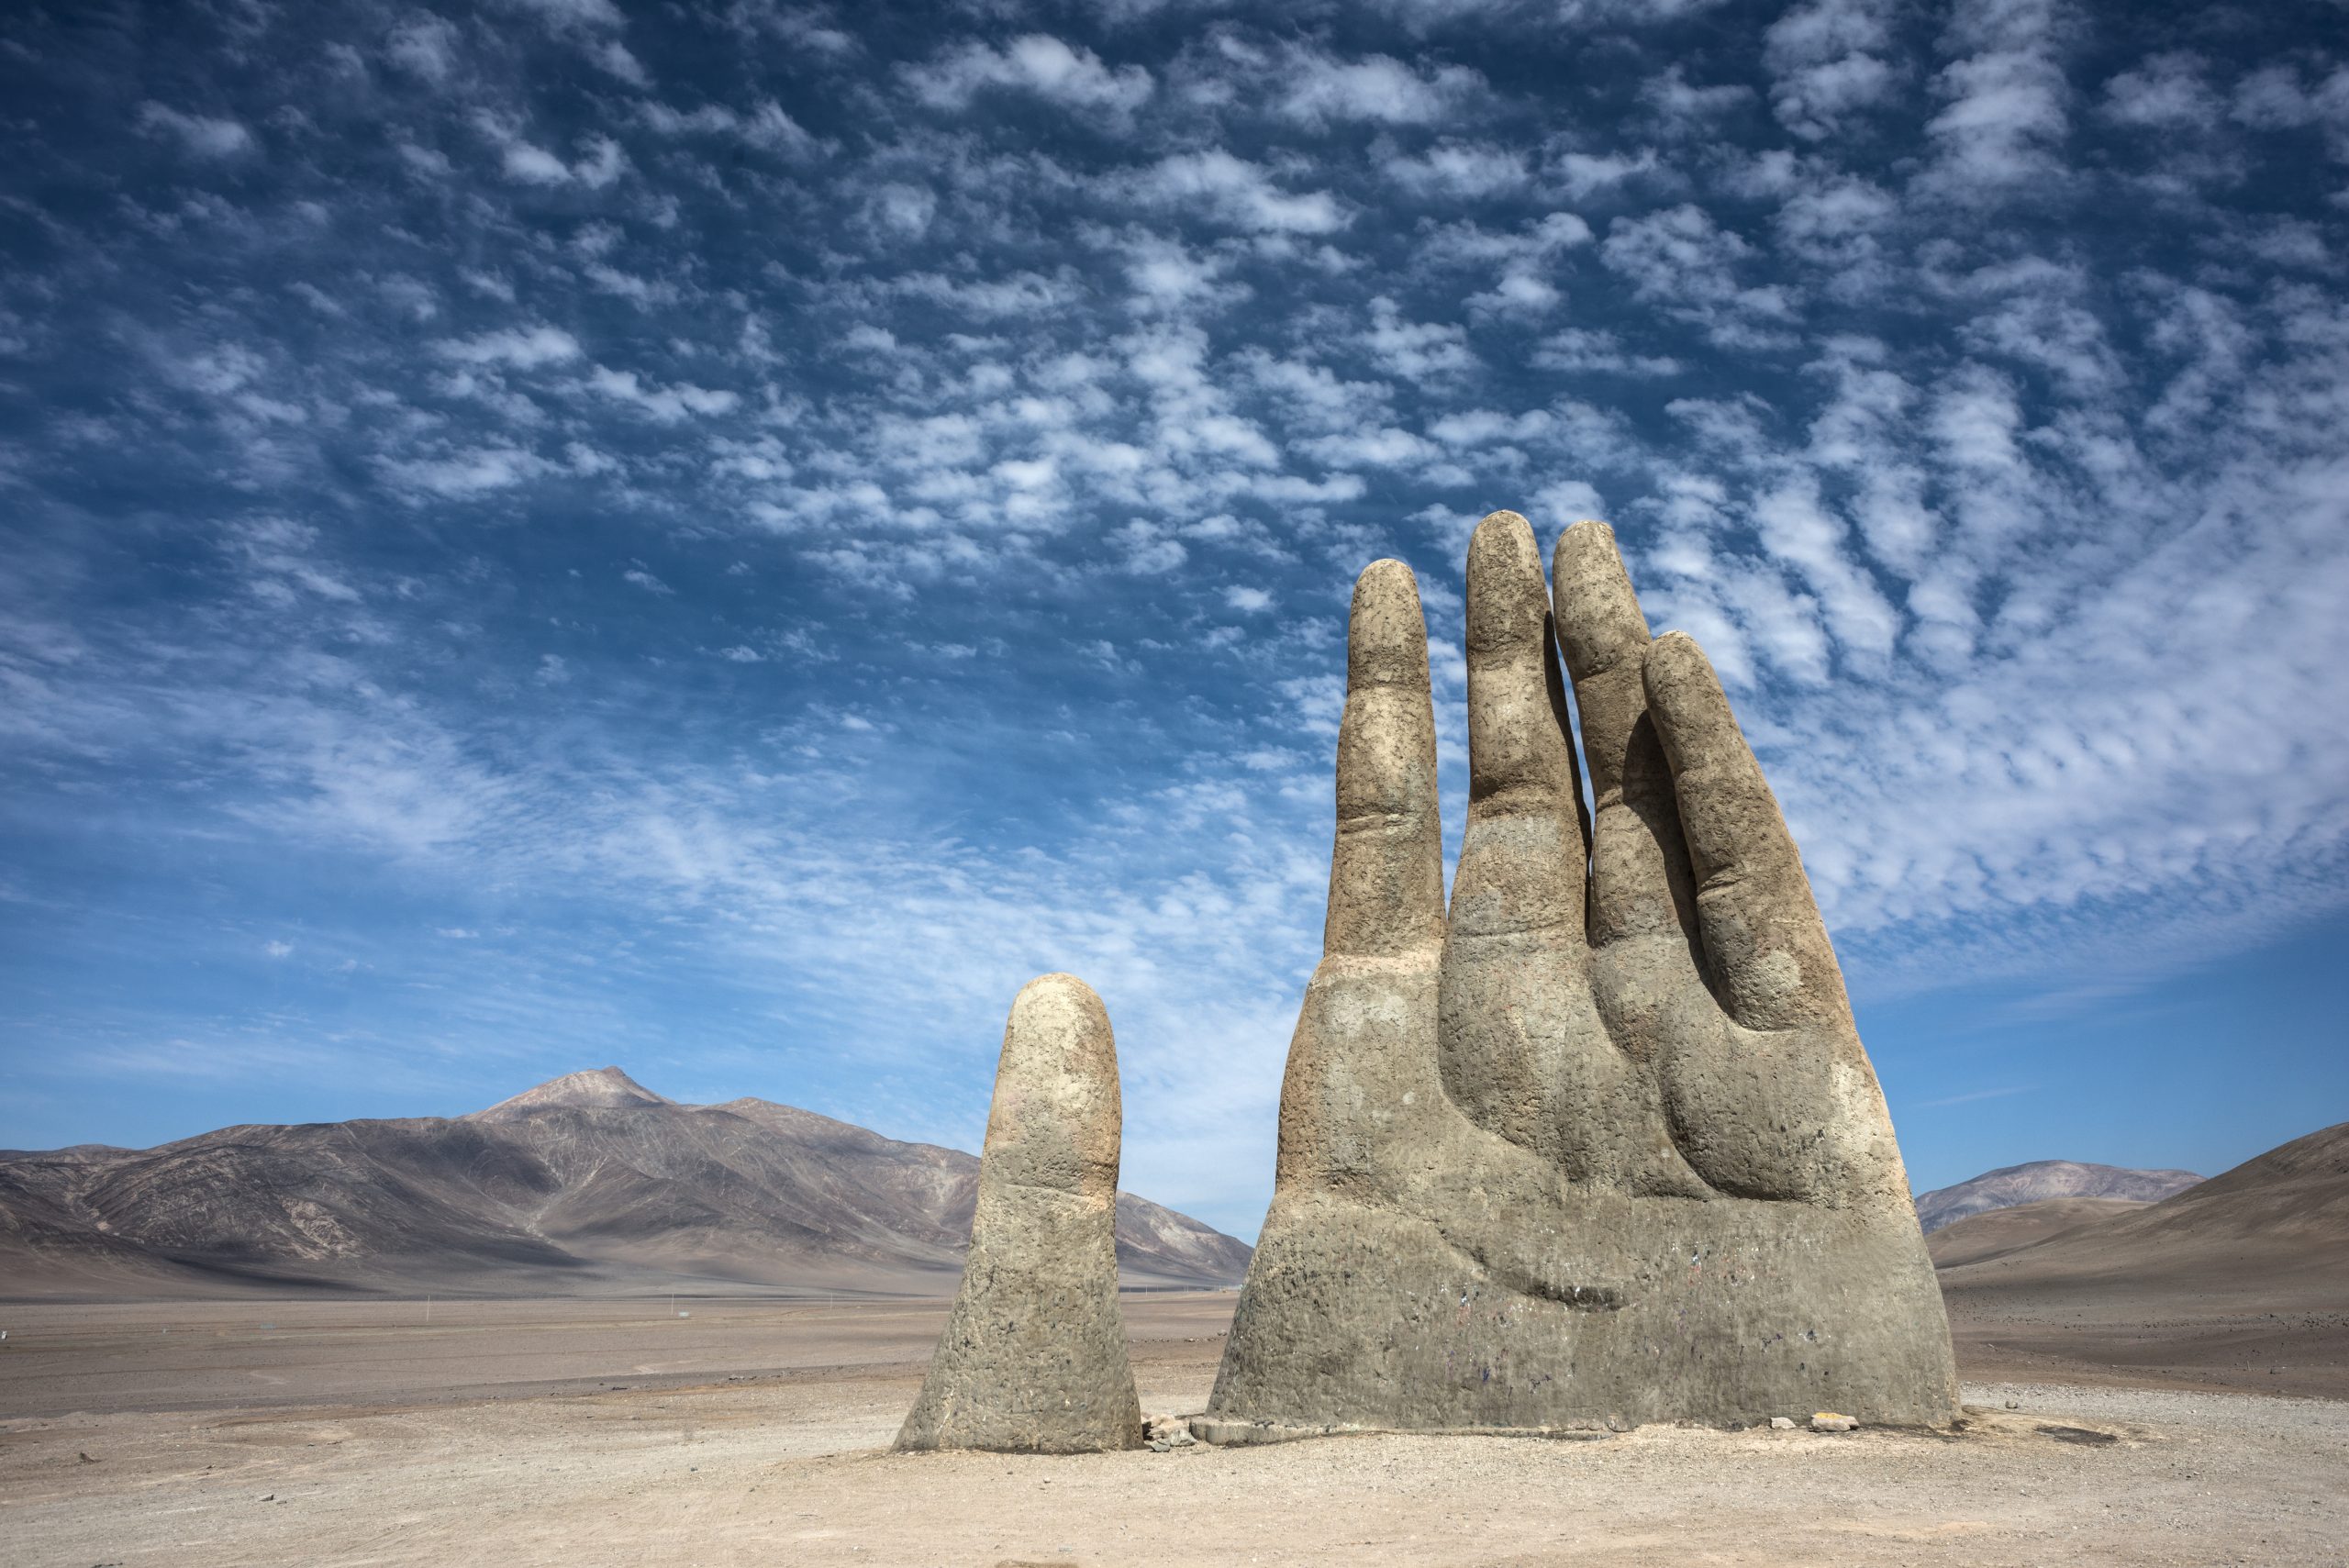 The massive sculpture in the middle of the Chilean desert respectively called the Hand of the Desert. Credit: DepositPhotos